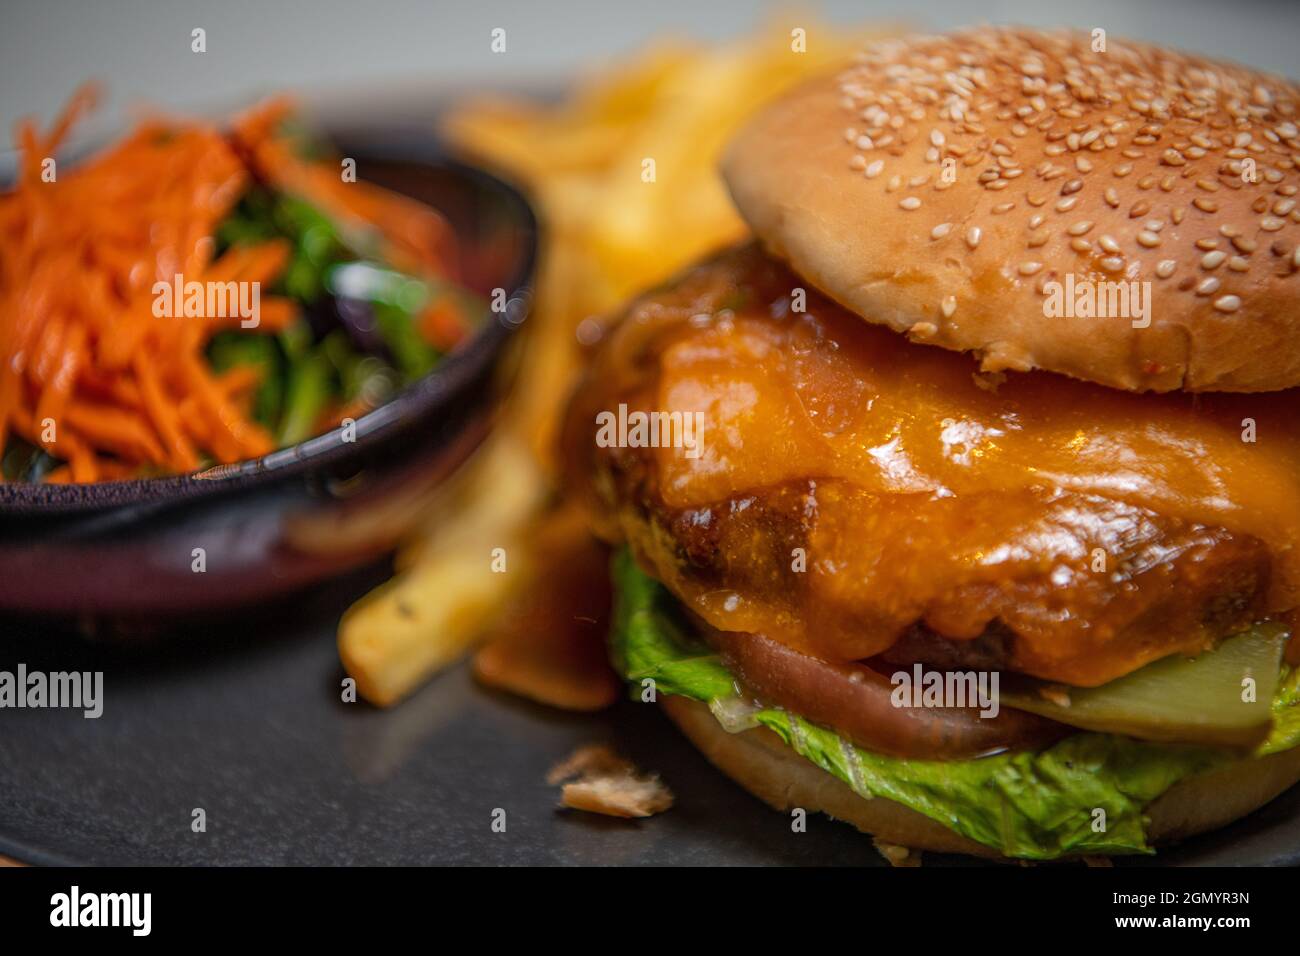 Craft beef burger and French fries Stock Photo